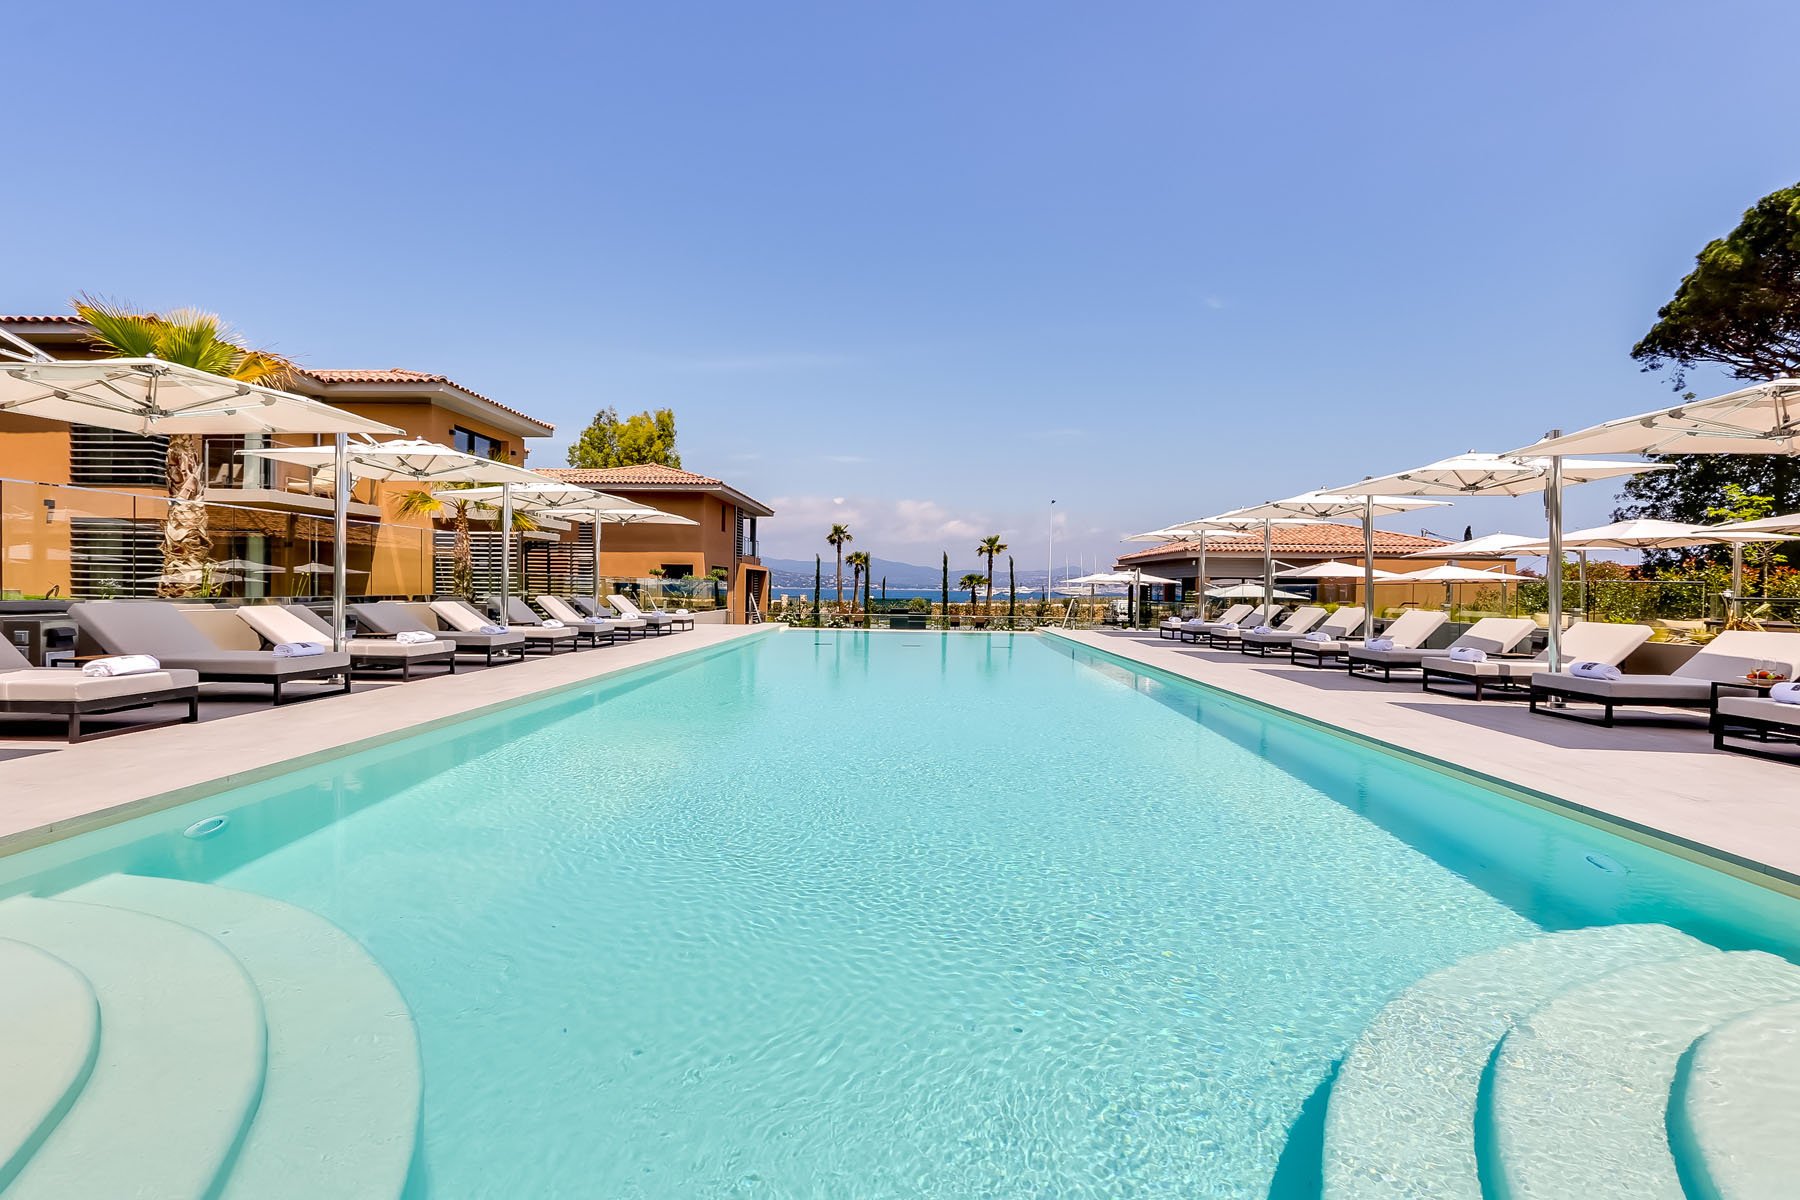 Outdoor Pool  - Kube Hotel Saint-Tropez - South of France